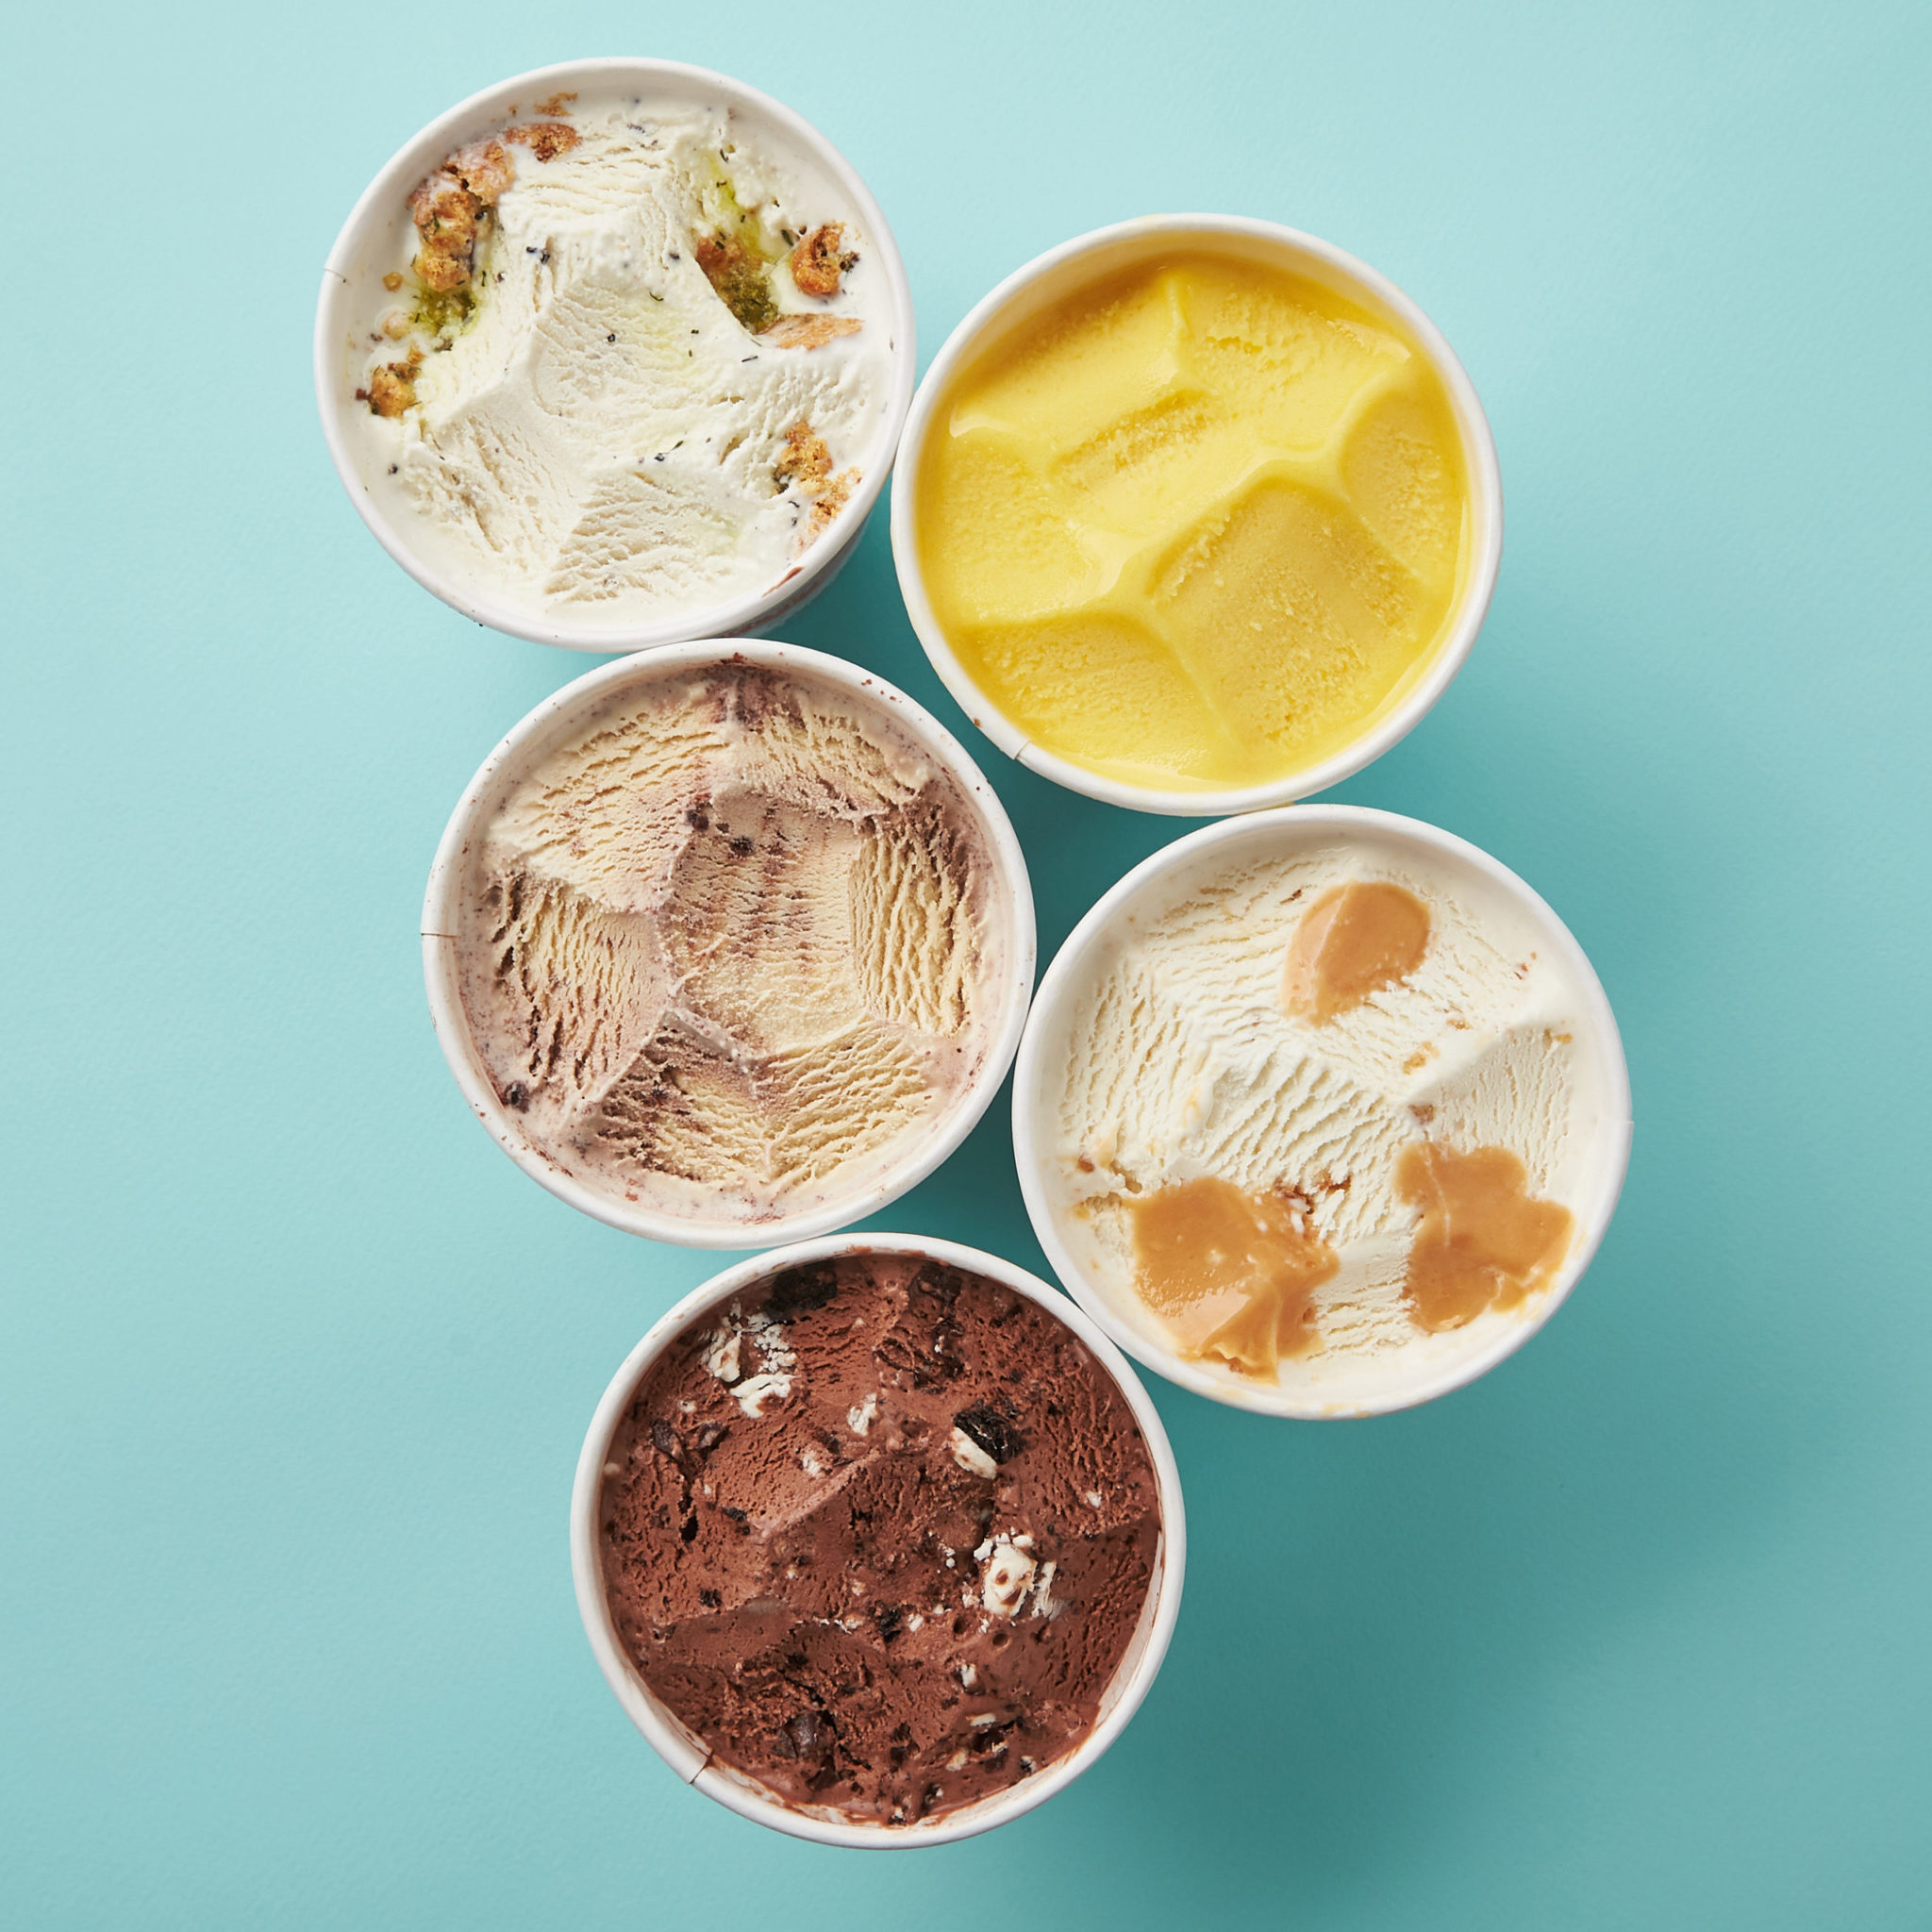 Miami pint pack from Salt & Straw